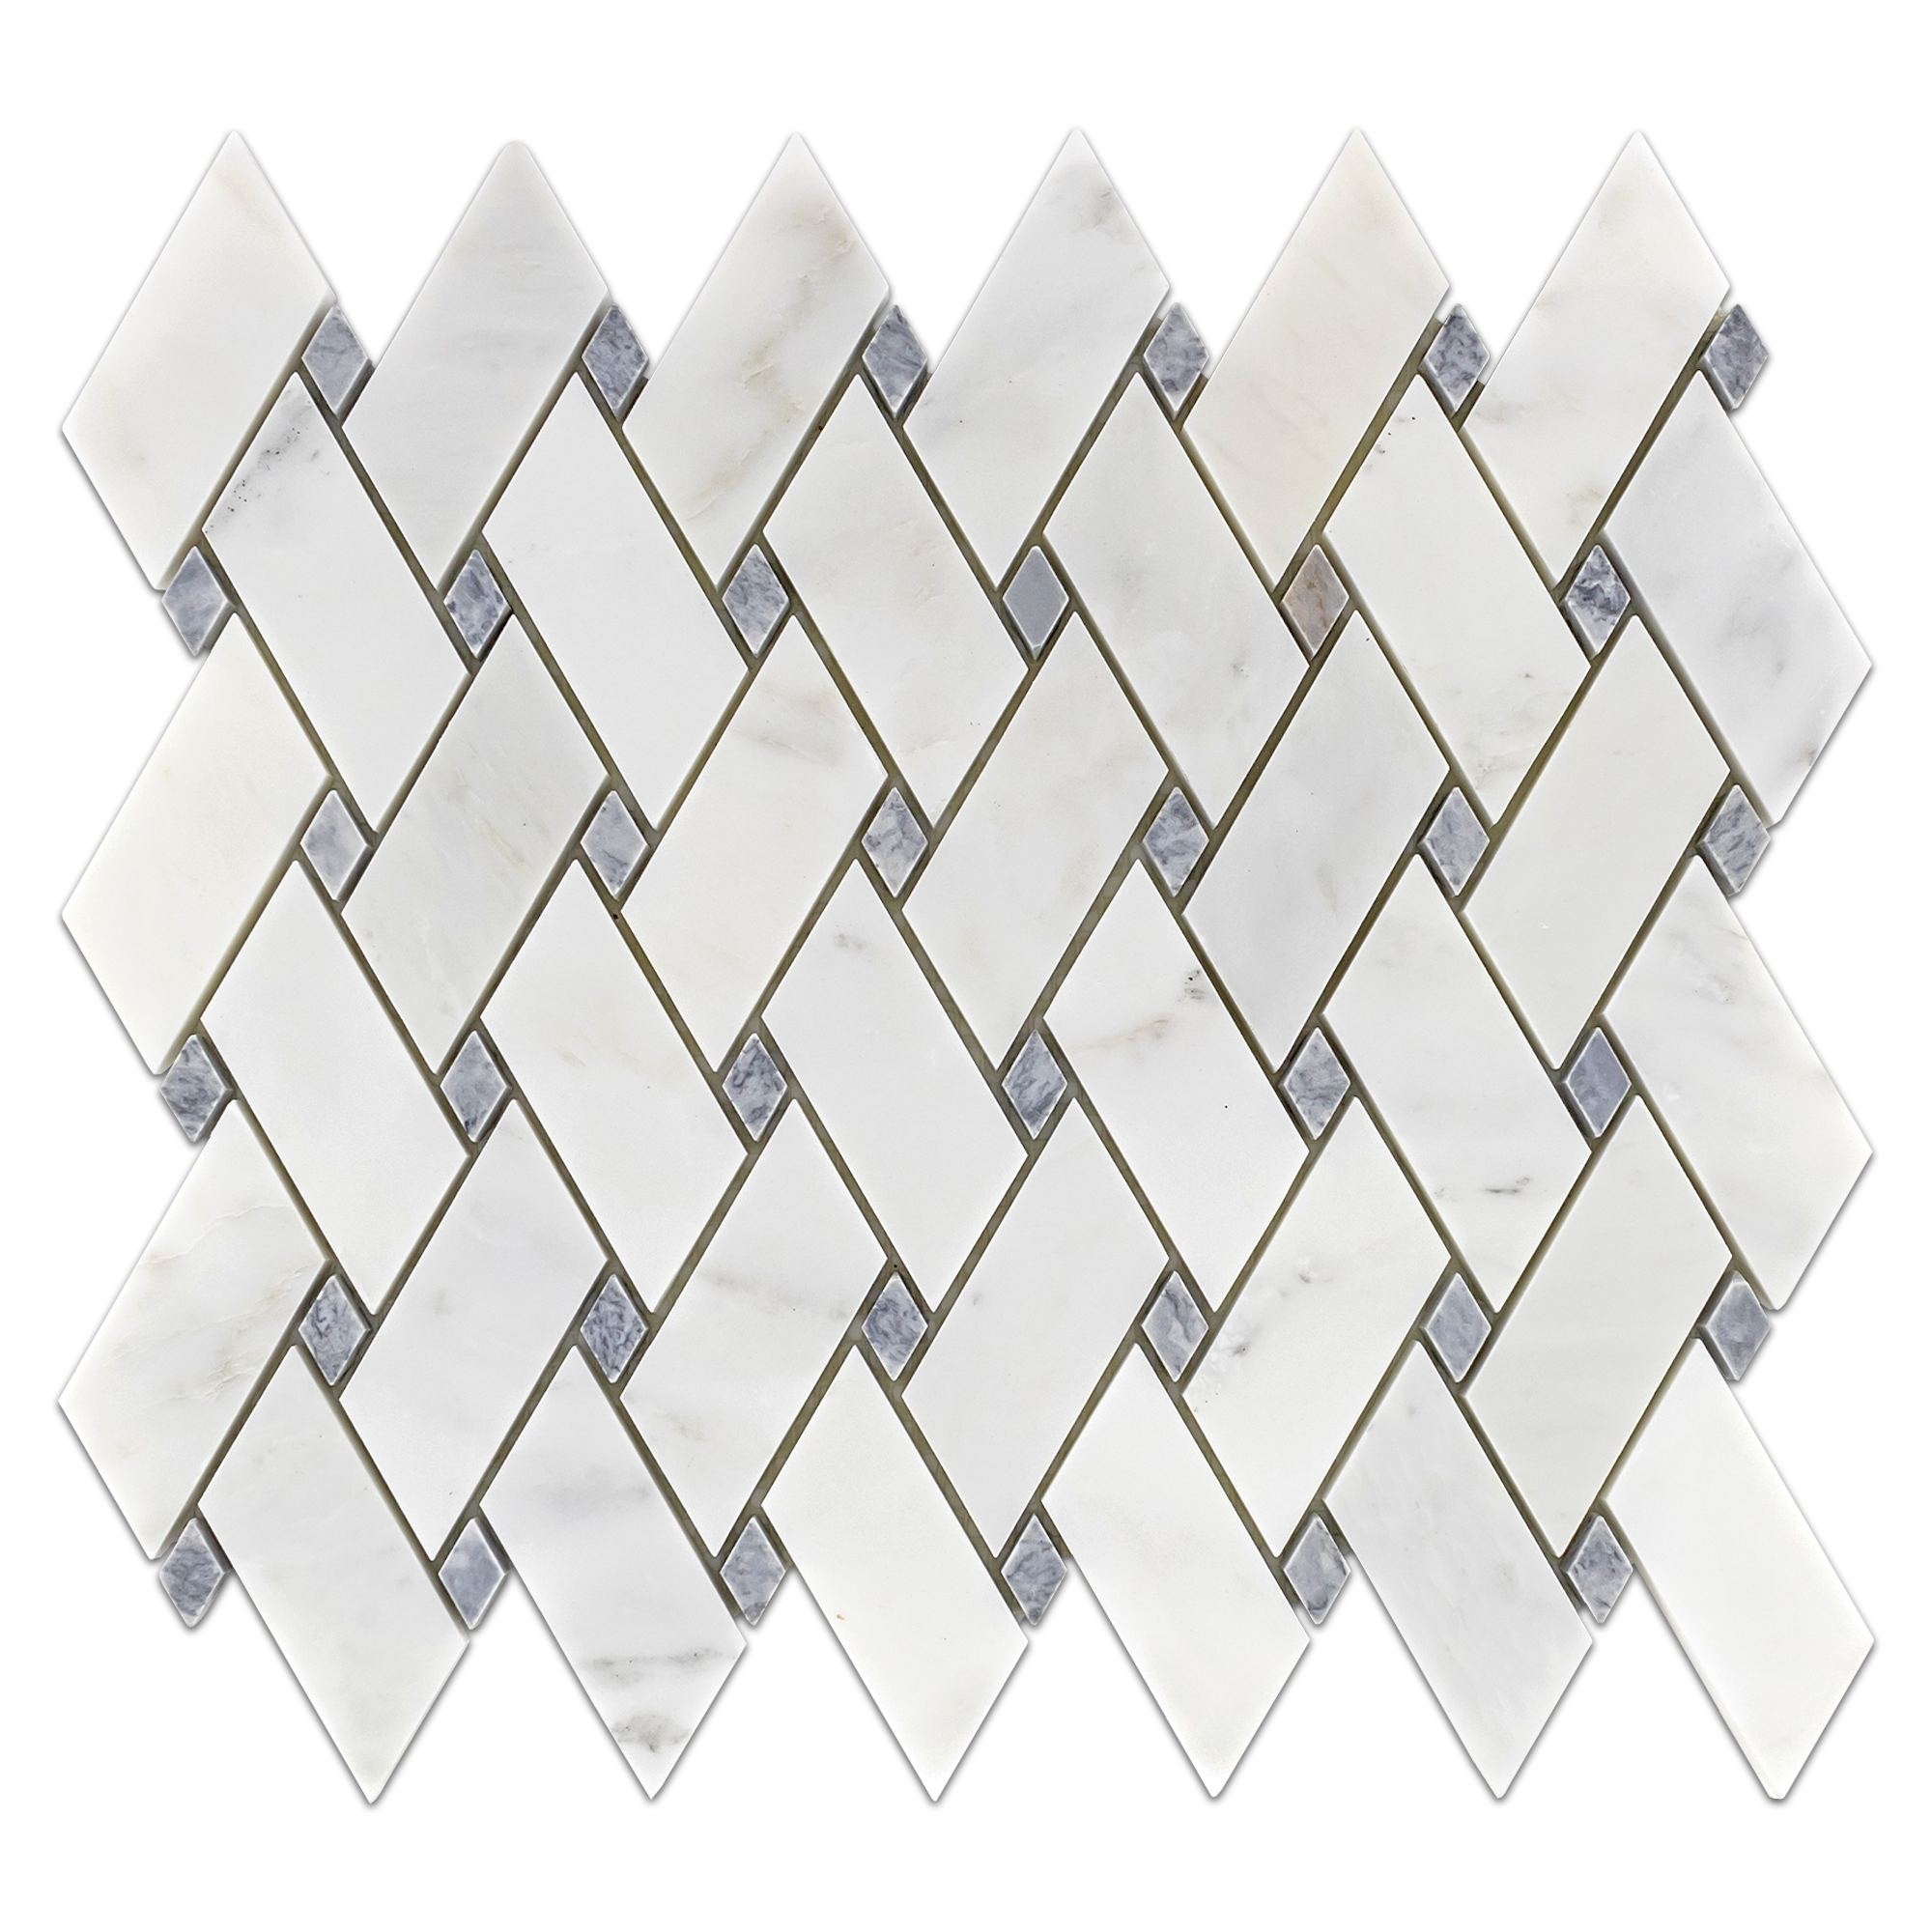 Elon Pearl White Pacific Gray Marble Sheared Basketweave Field Mosaic 10.1875x11.3125x0.375 Honed AM8630H Surface Group International Product